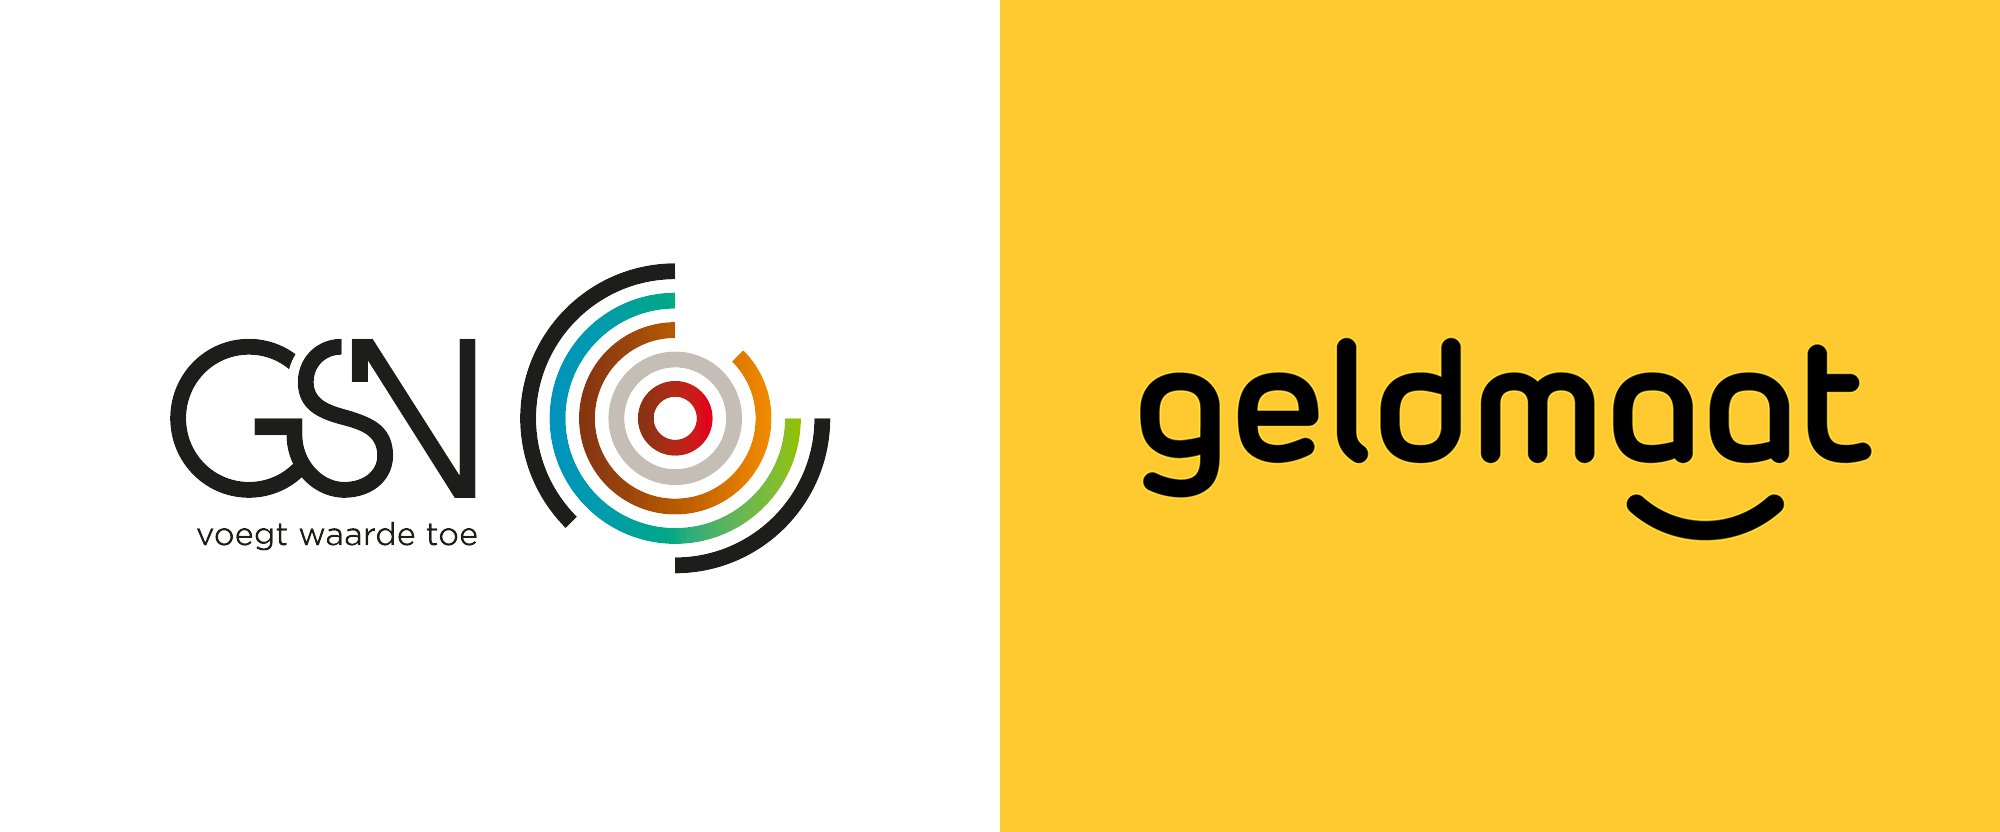 New Name and Logo for Geldmaat by VBAT